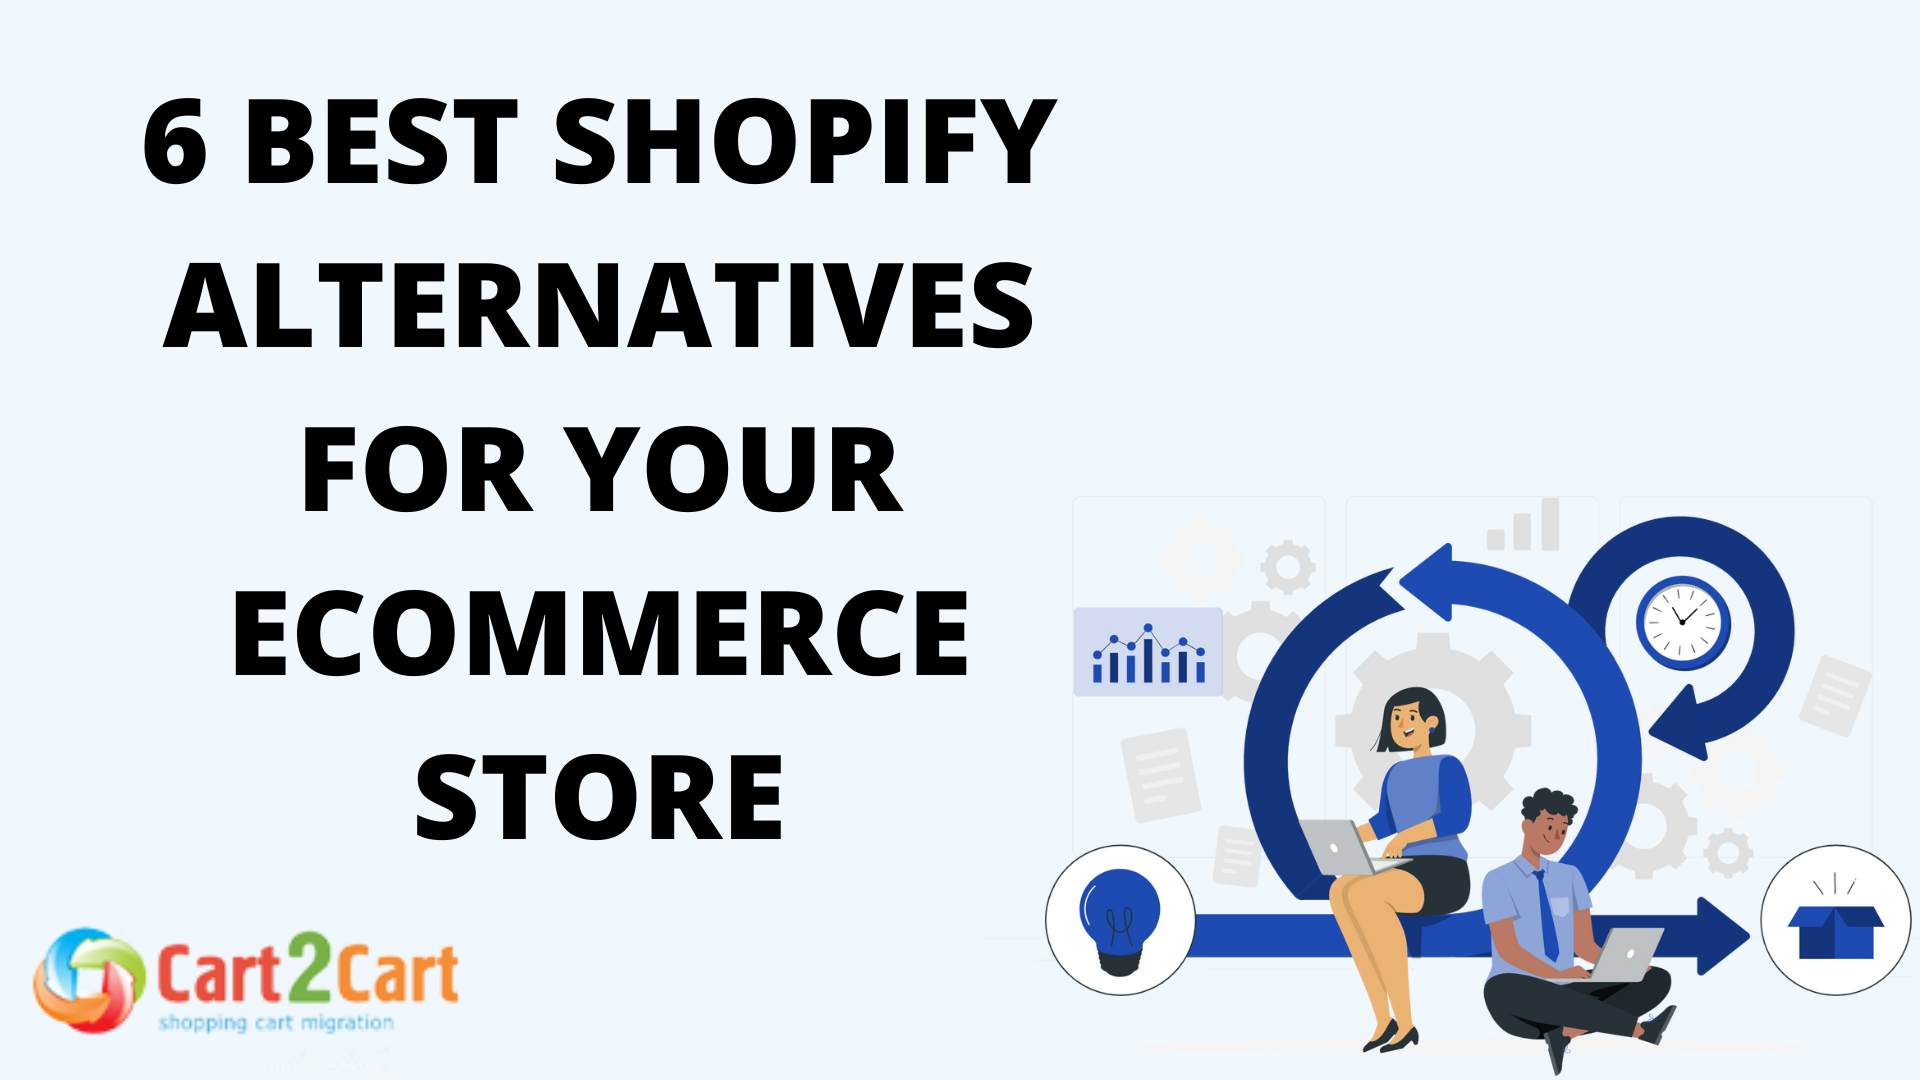 6 Best Shopify Alternatives for Your Ecommerce Store